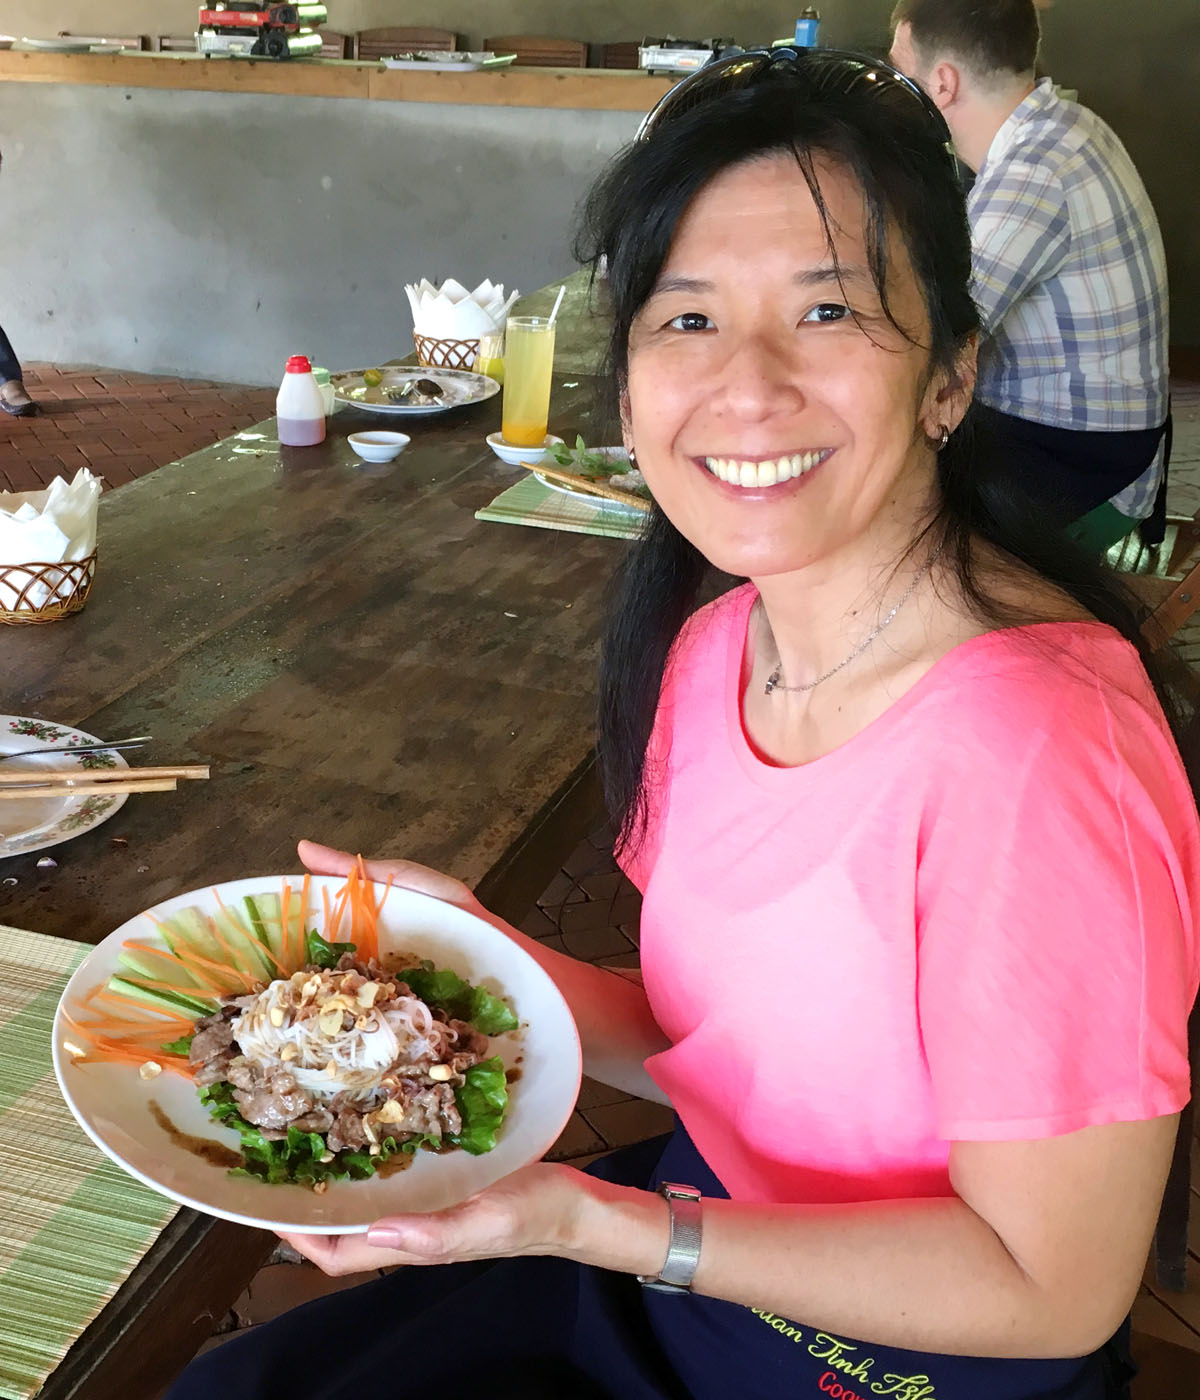 Asian woman wearing a pink shirt, holding a white dish containing vegetable and noodles.